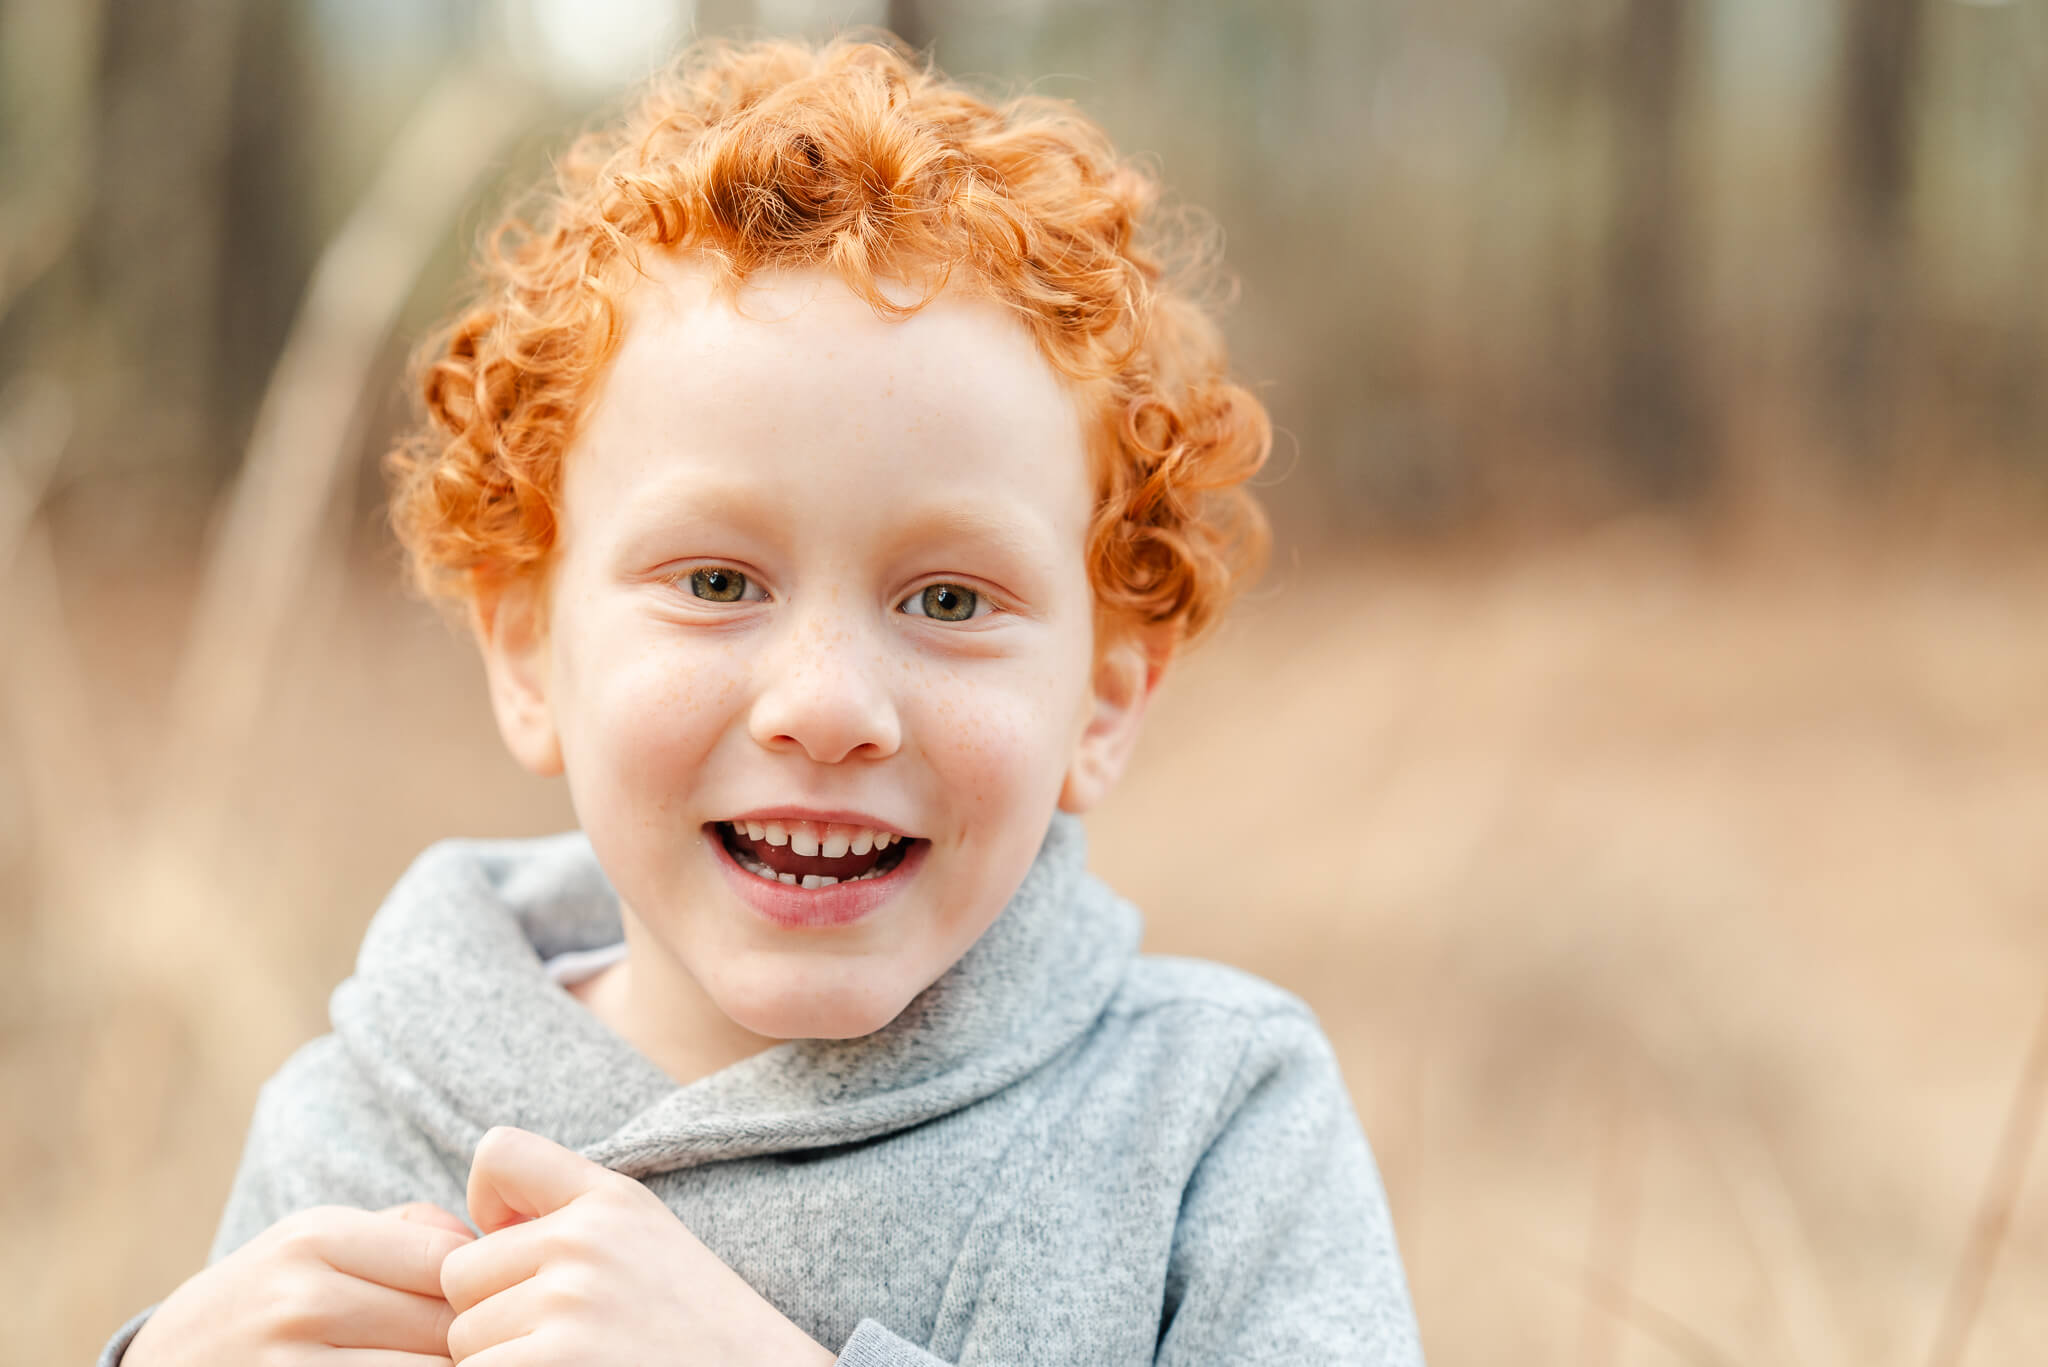 A young boy with curly red hair smiles while playing with the button on his gray sweater. He attends elementary at one of the many Norfolk private schools.